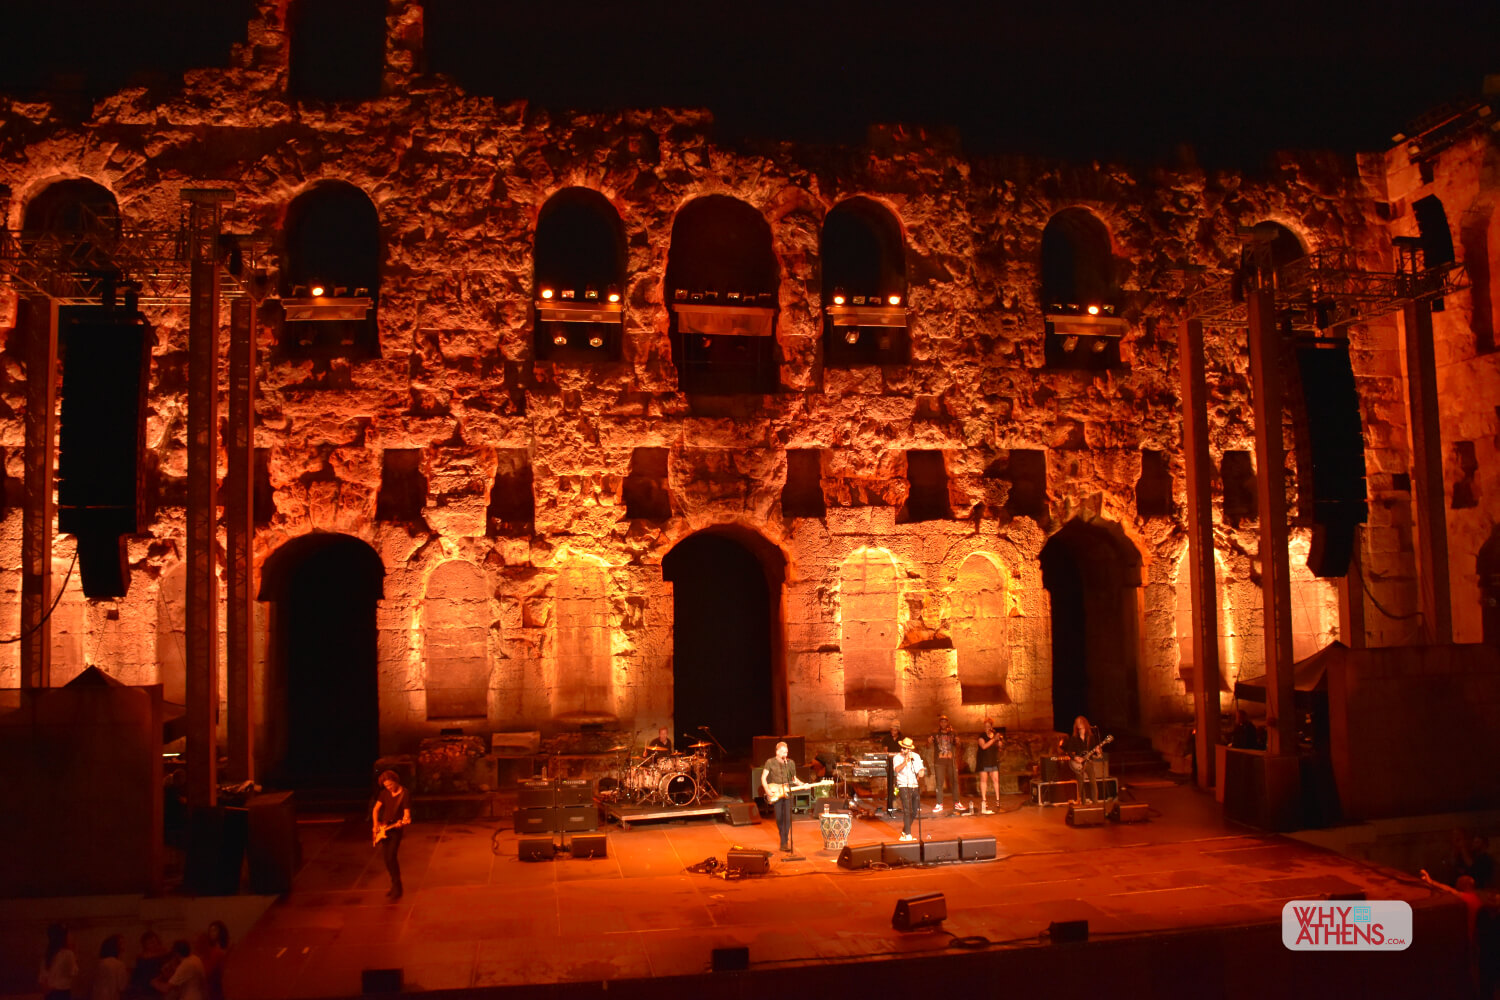 Odeon of Herodes Atticus detailed guide & events Why Athens